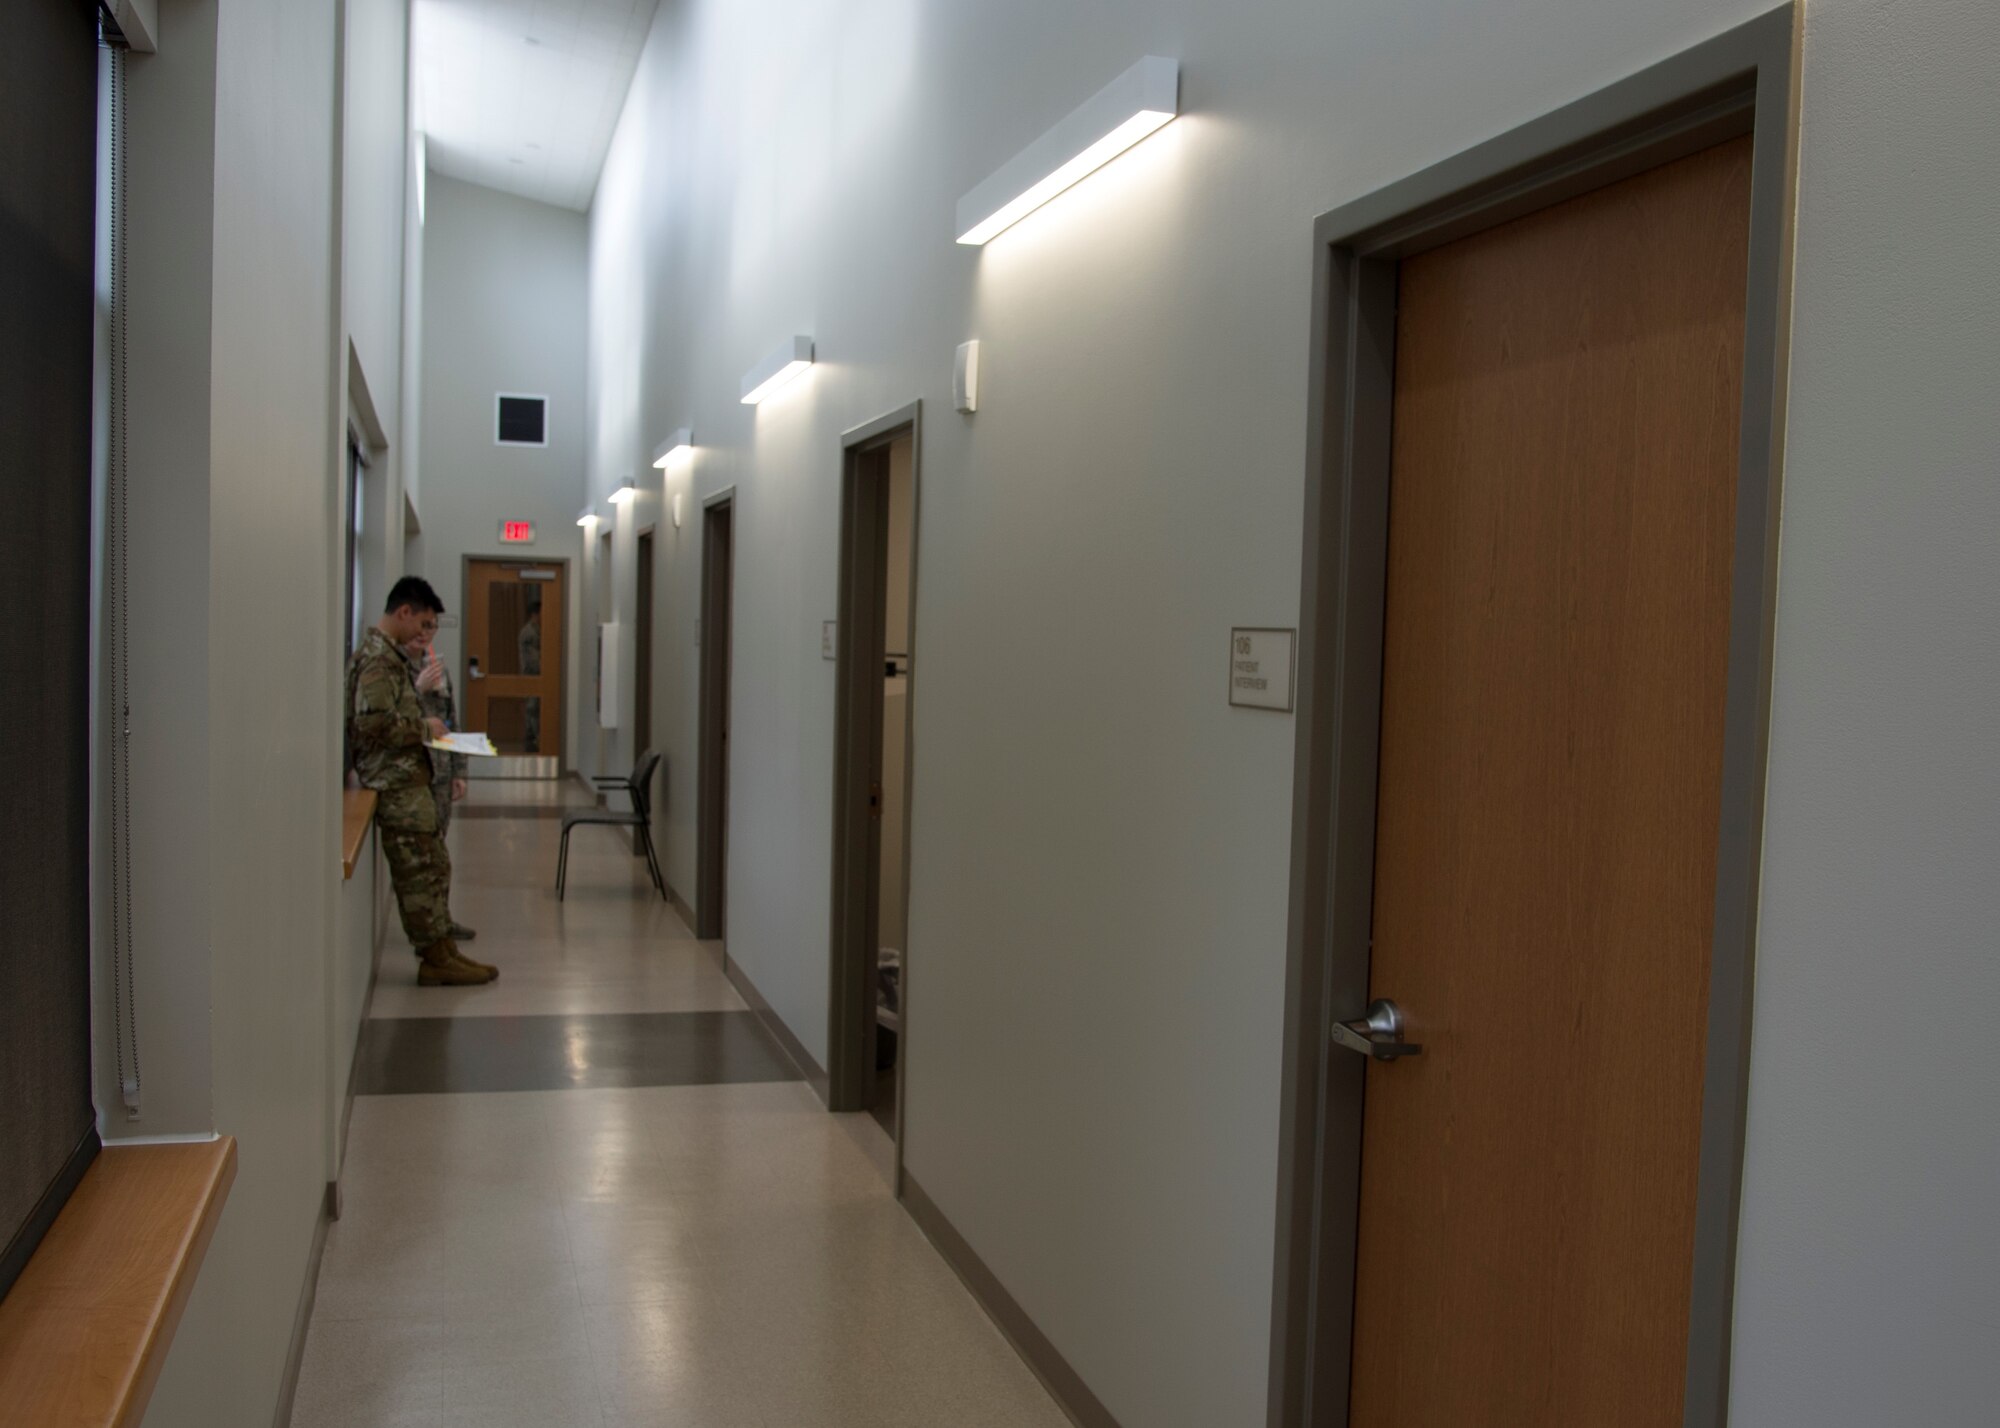 Patient Interview rooms at renovated 446th AMDS facility.